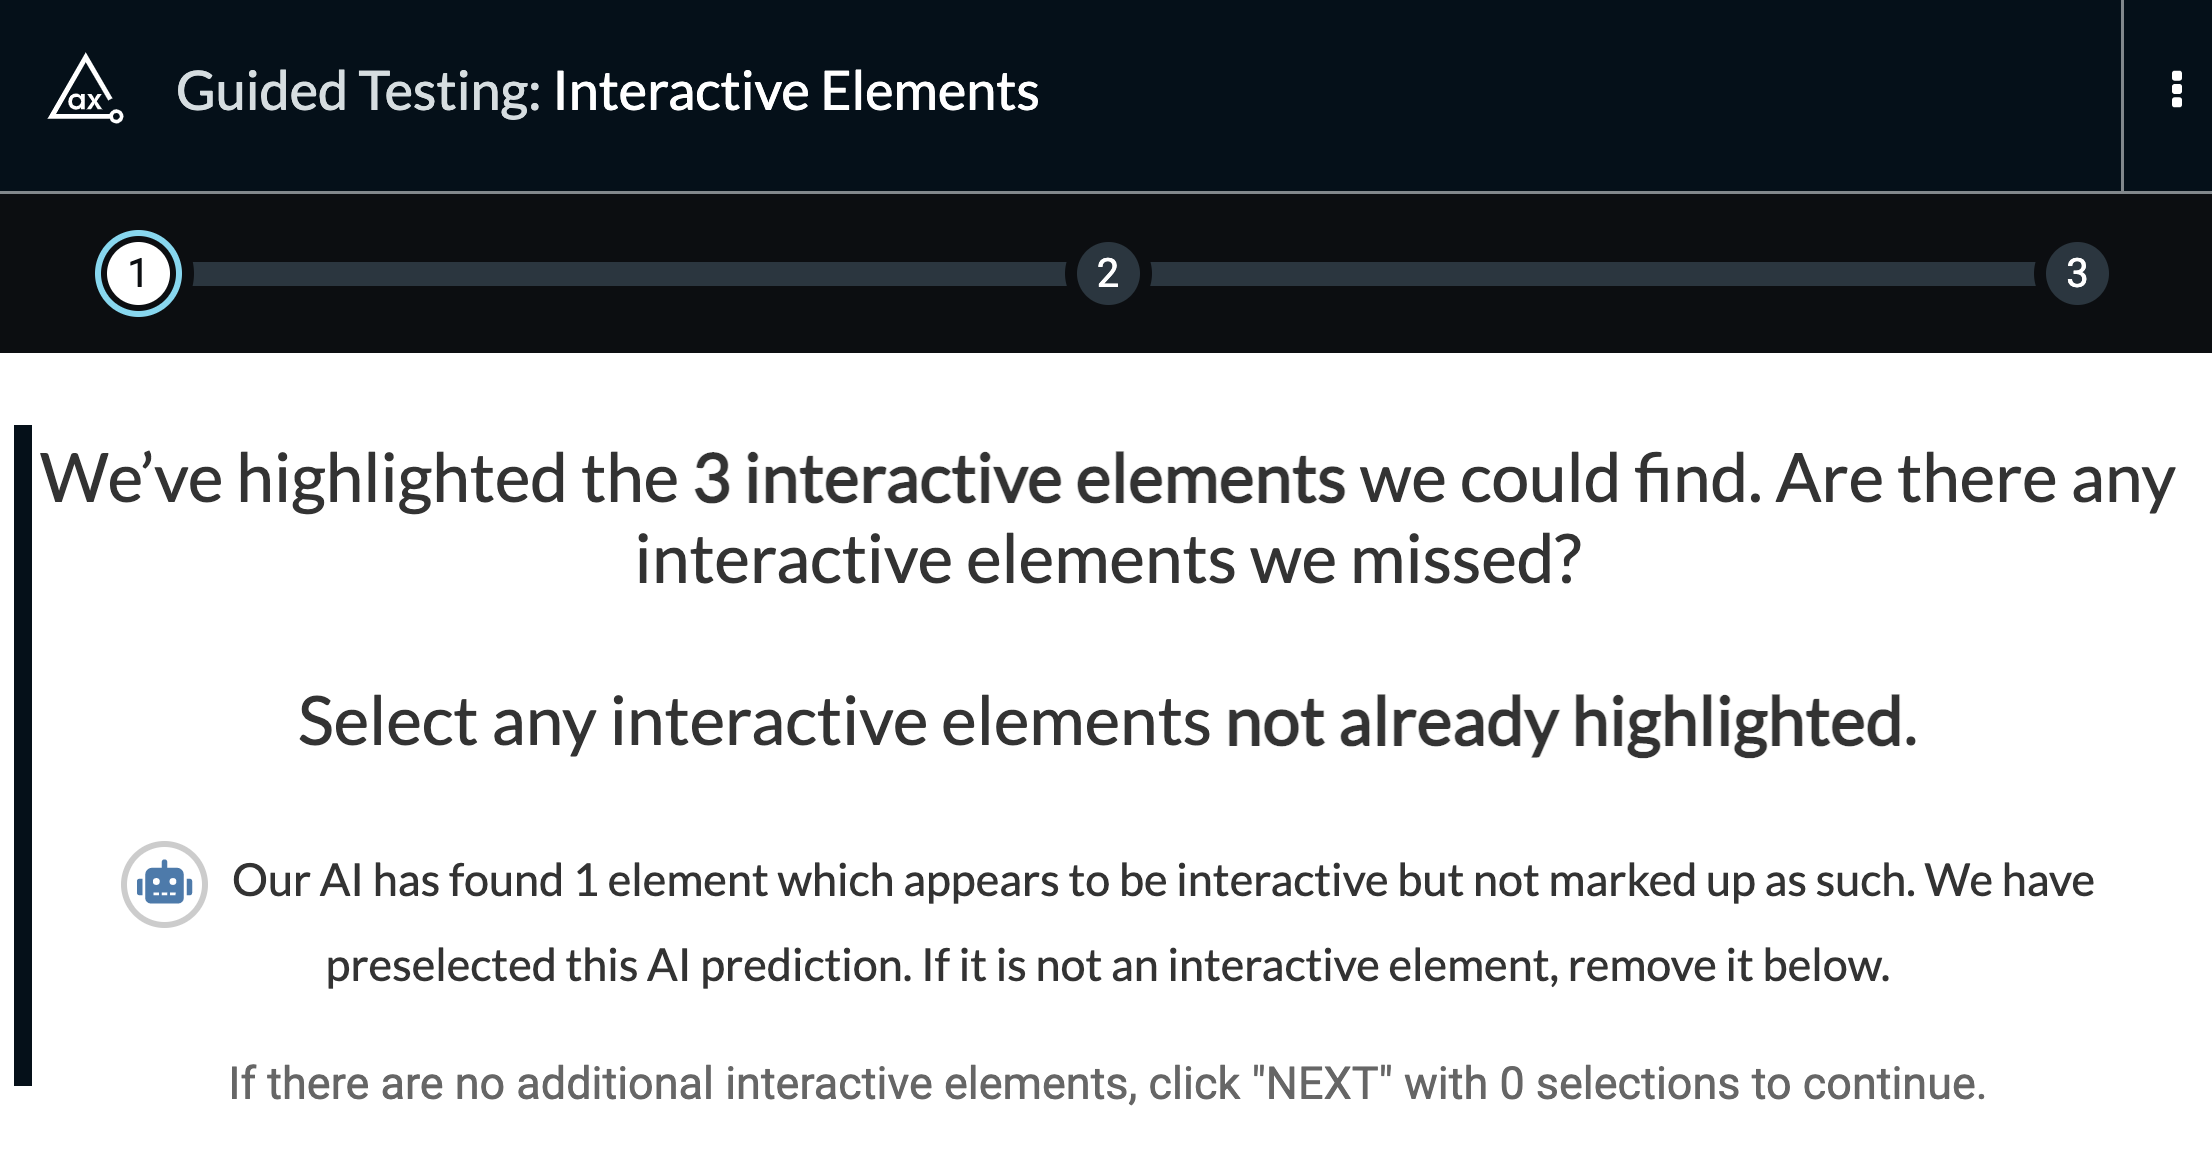 Screenshot of a new notification in the Interactive Elements IGT that states "Our AI has found 1 element which appears to be interactive but not marked up as such. If this is not an interactive element please remove it."